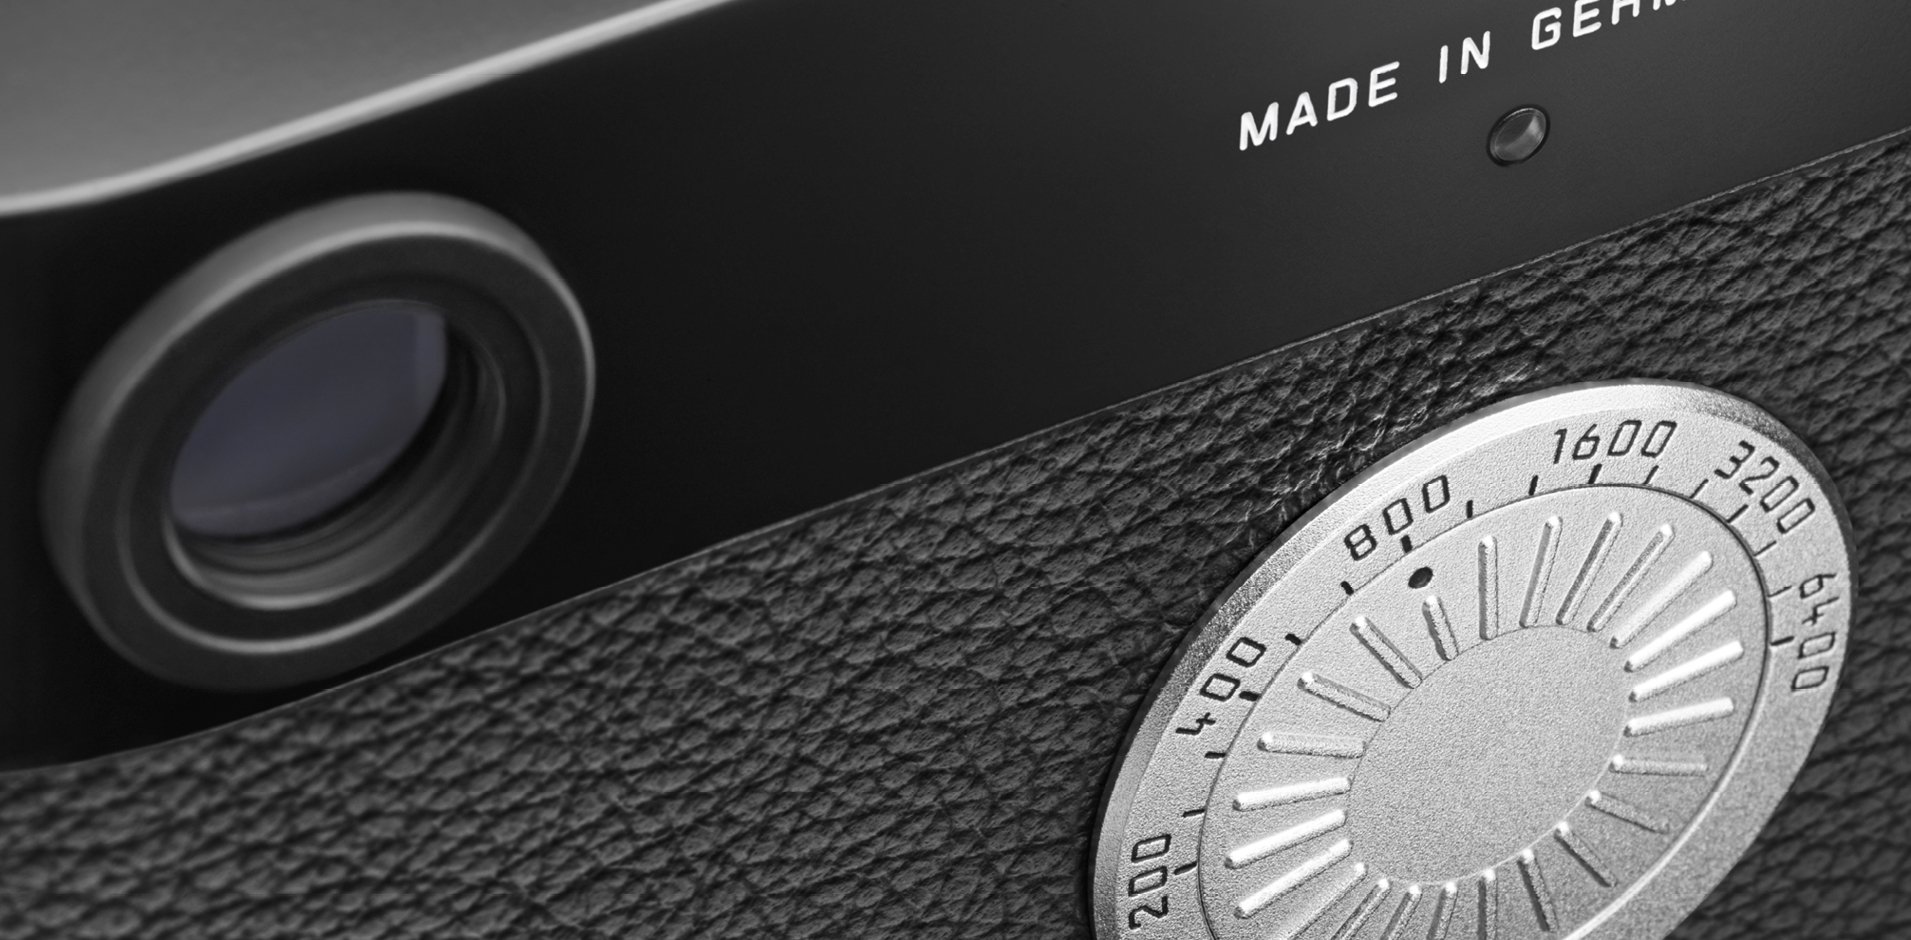 No More Chimping: Leica Reveals the LCD-Free Leica M-D (Typ 262)